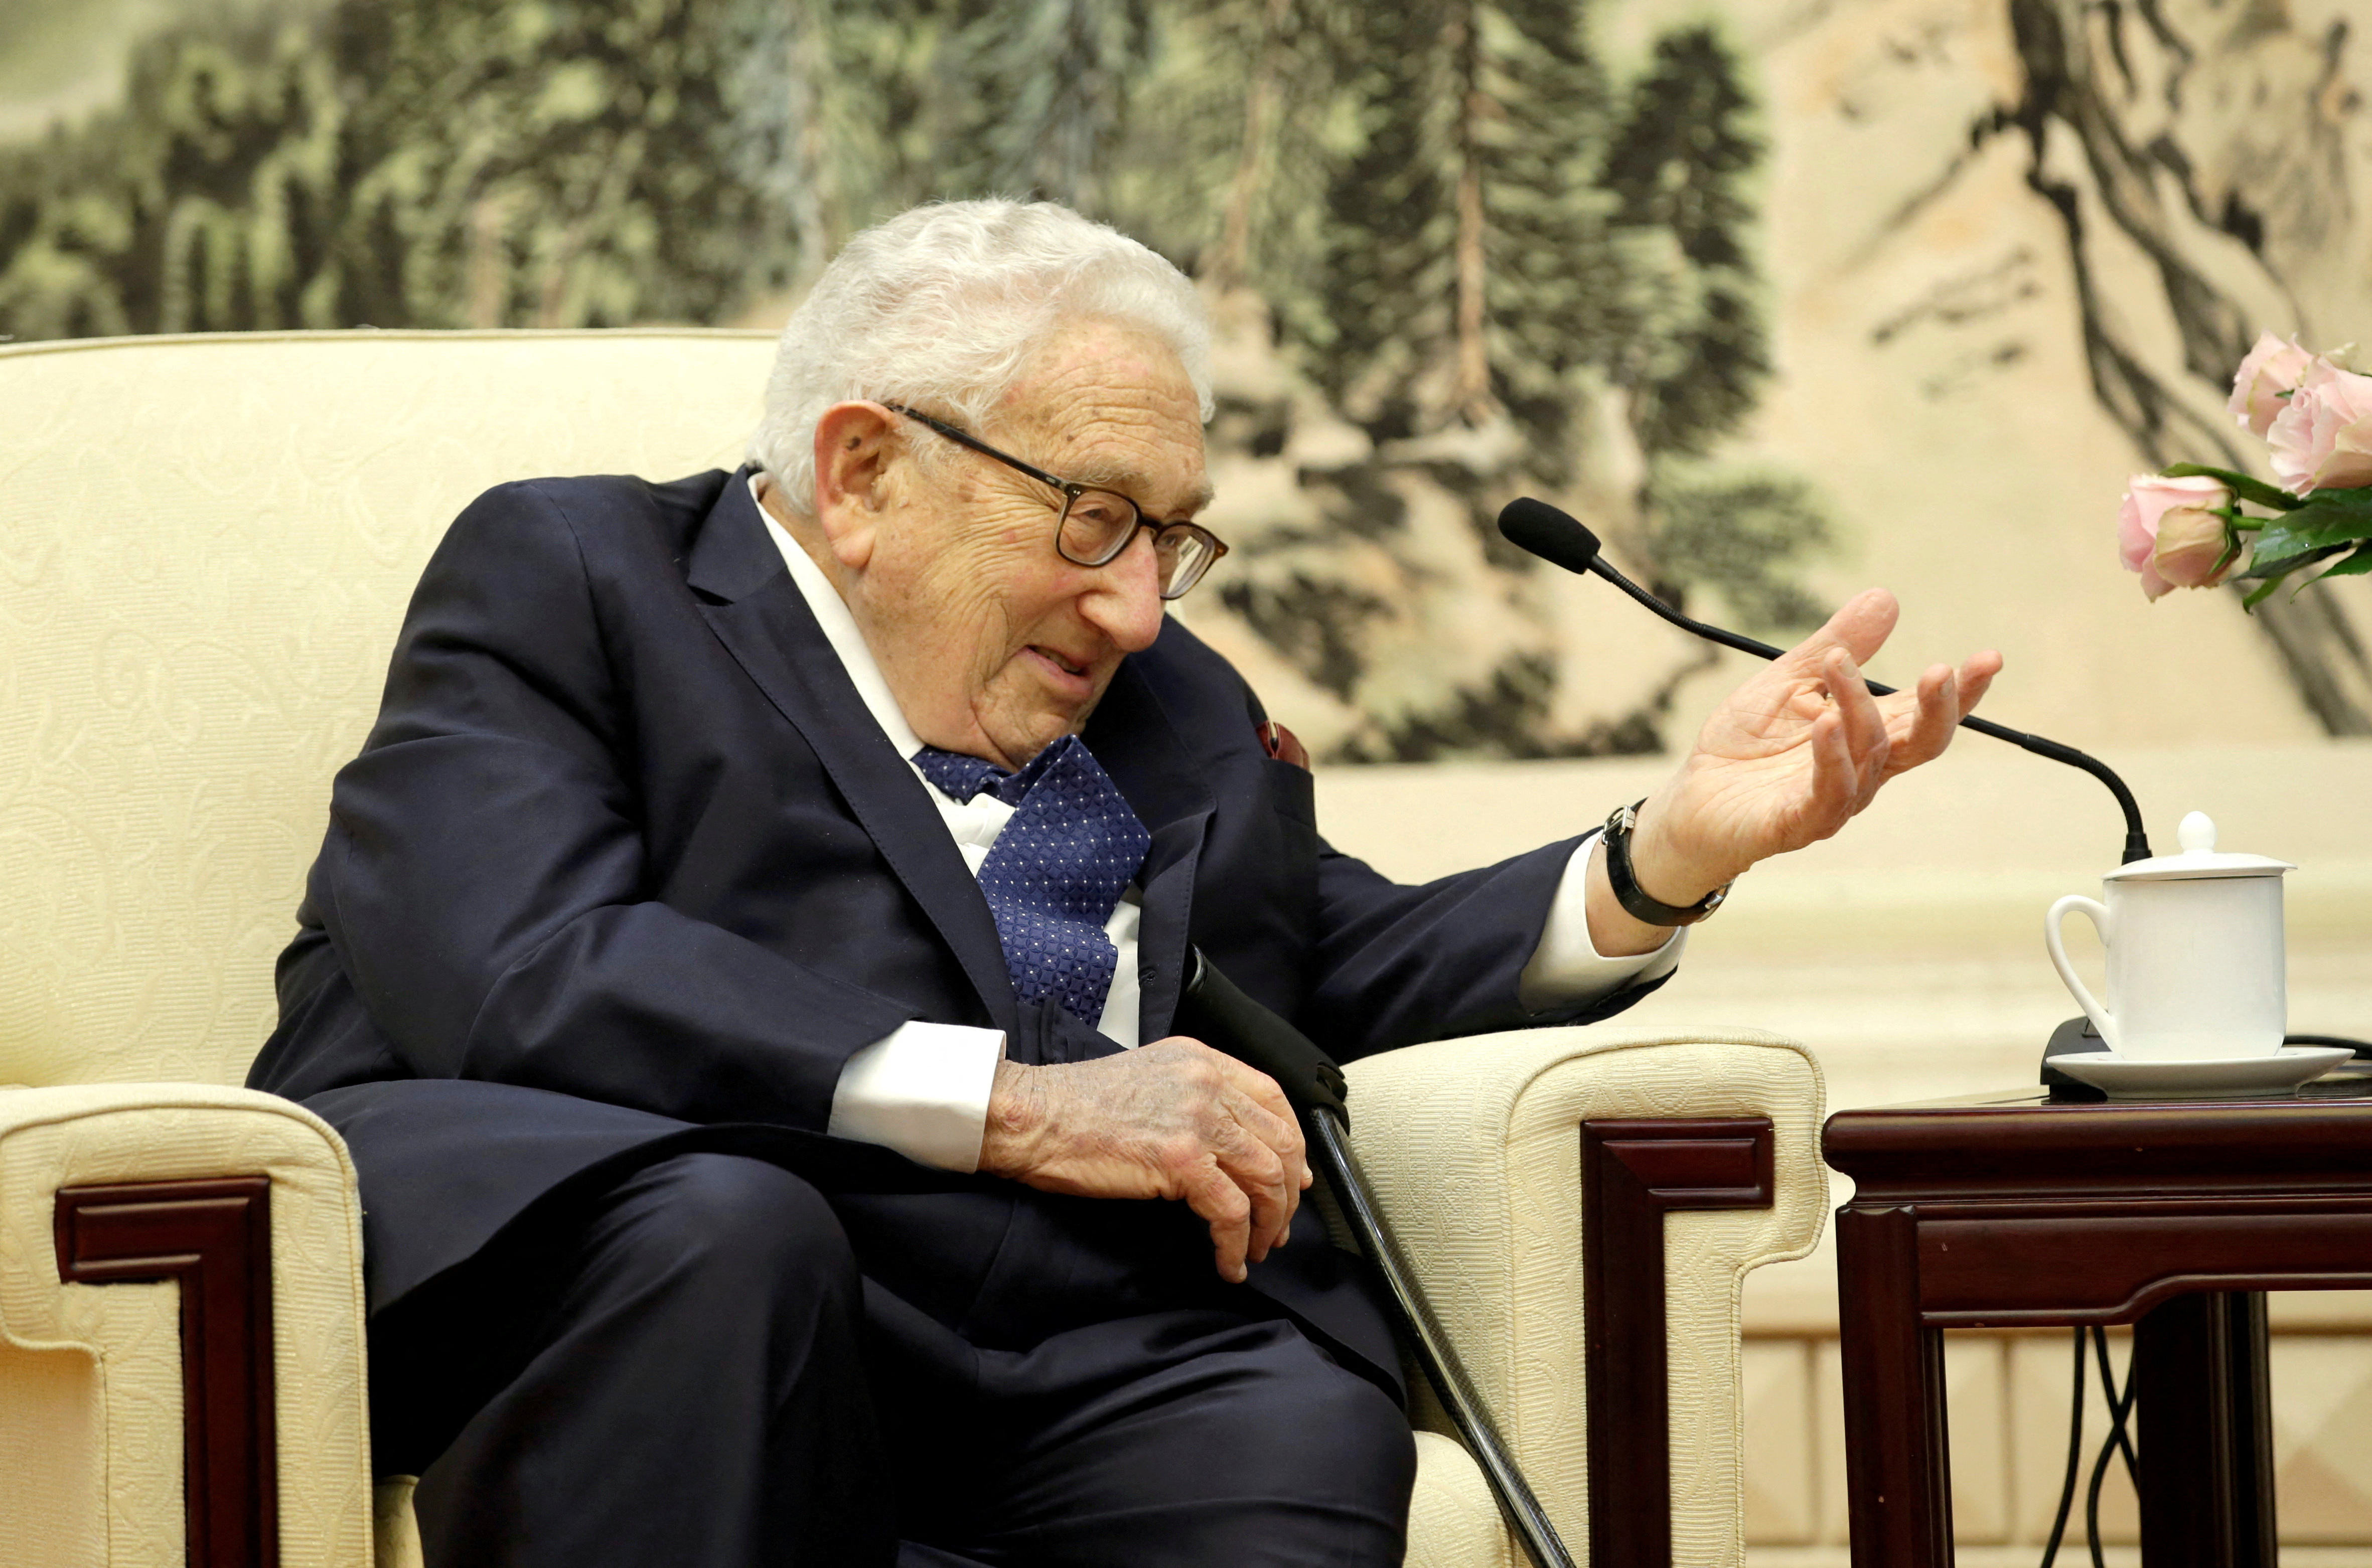 ormer U.S. Secretary of State Henry Kissinger speaks during a meeting with Chinese Foreign Minister Wang Yi in Beijing